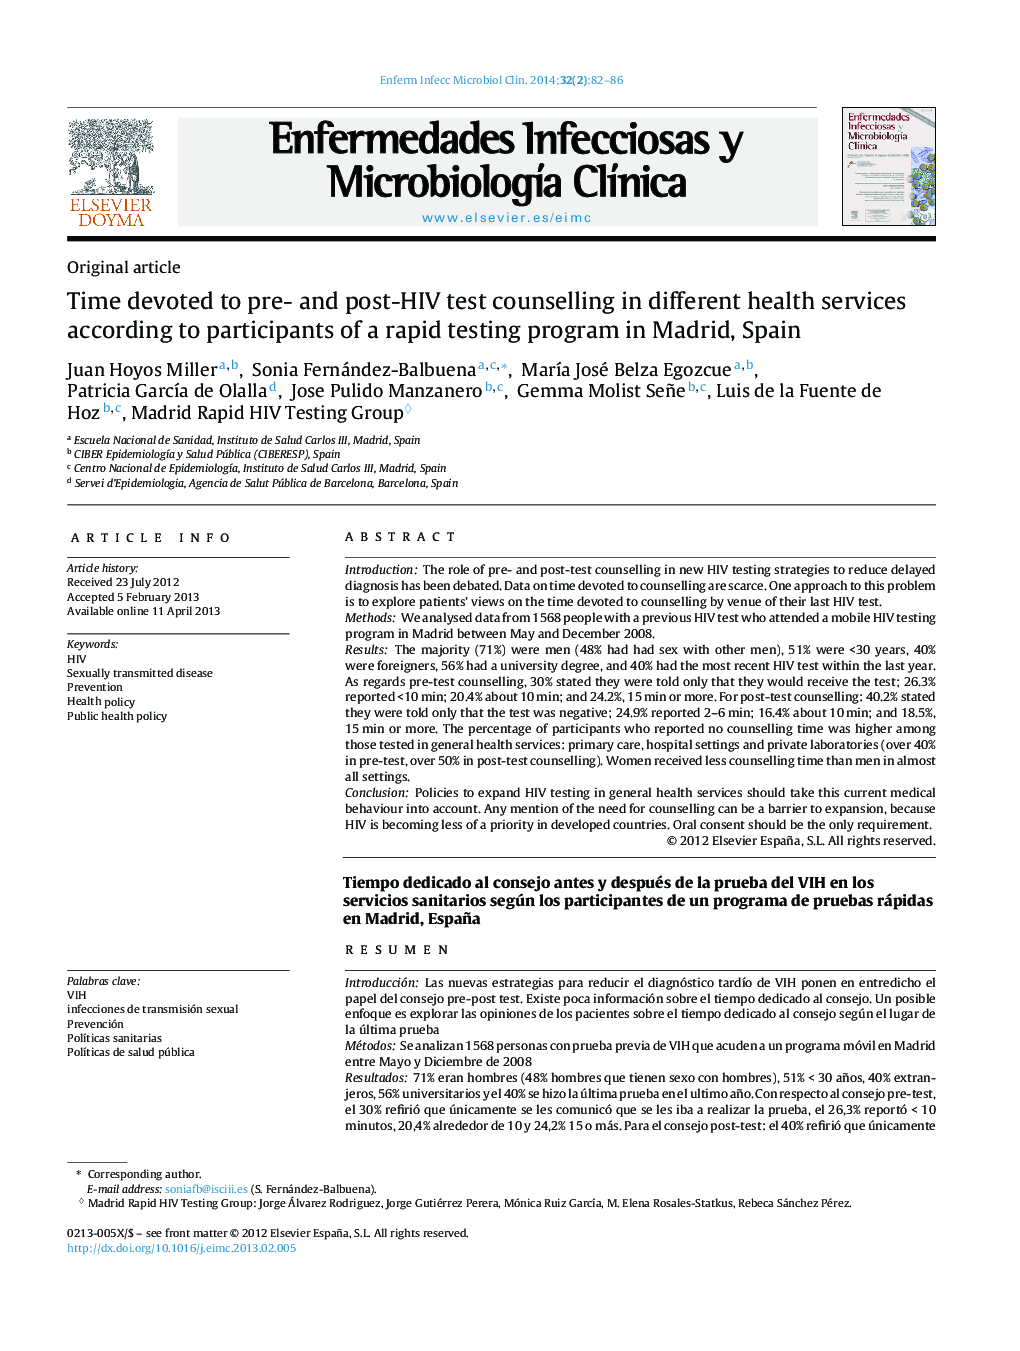 Time devoted to pre- and post-HIV test counselling in different health services according to participants of a rapid testing program in Madrid, Spain